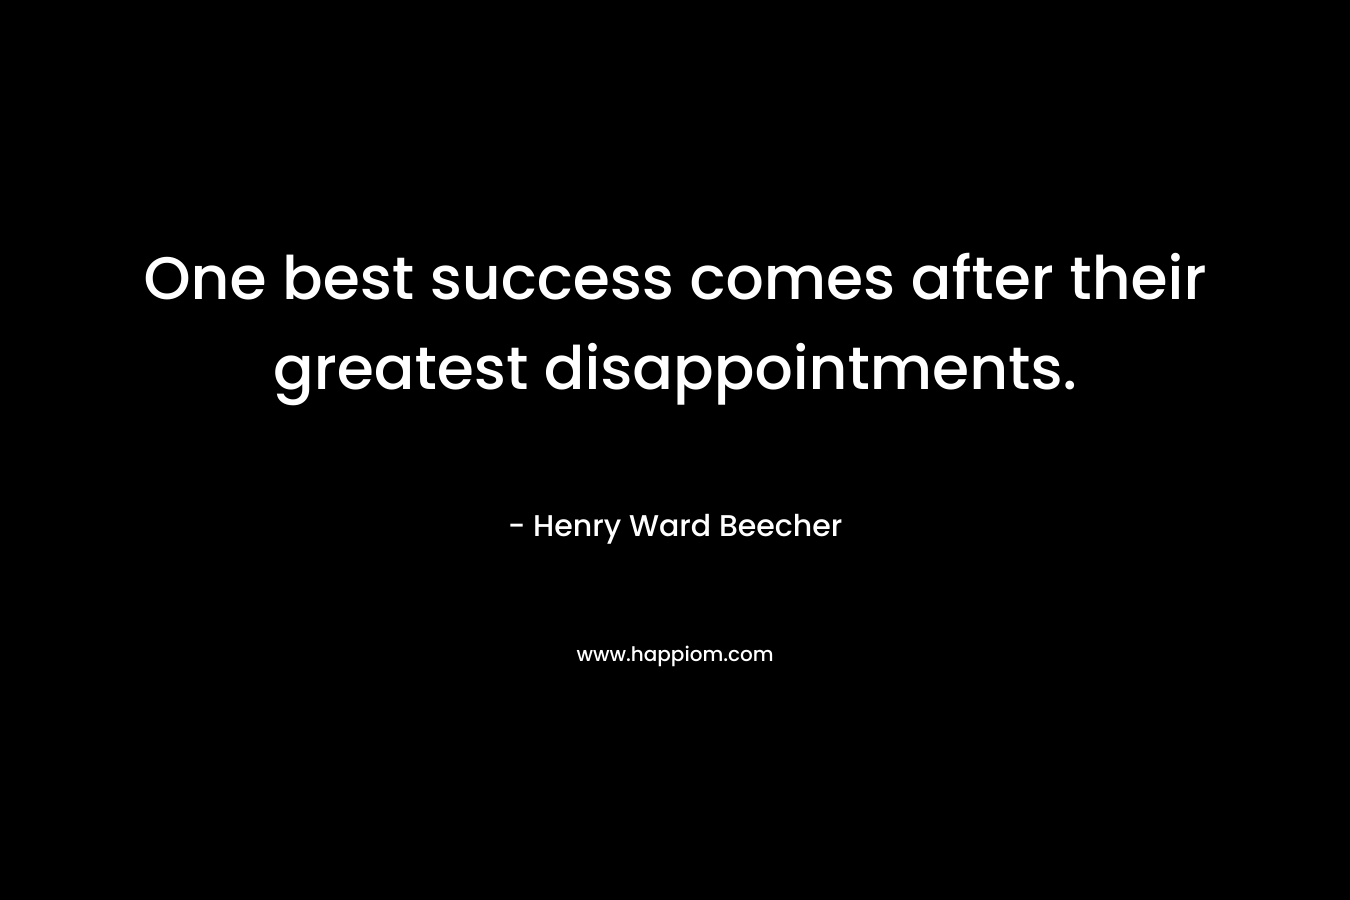 One best success comes after their greatest disappointments. – Henry Ward Beecher